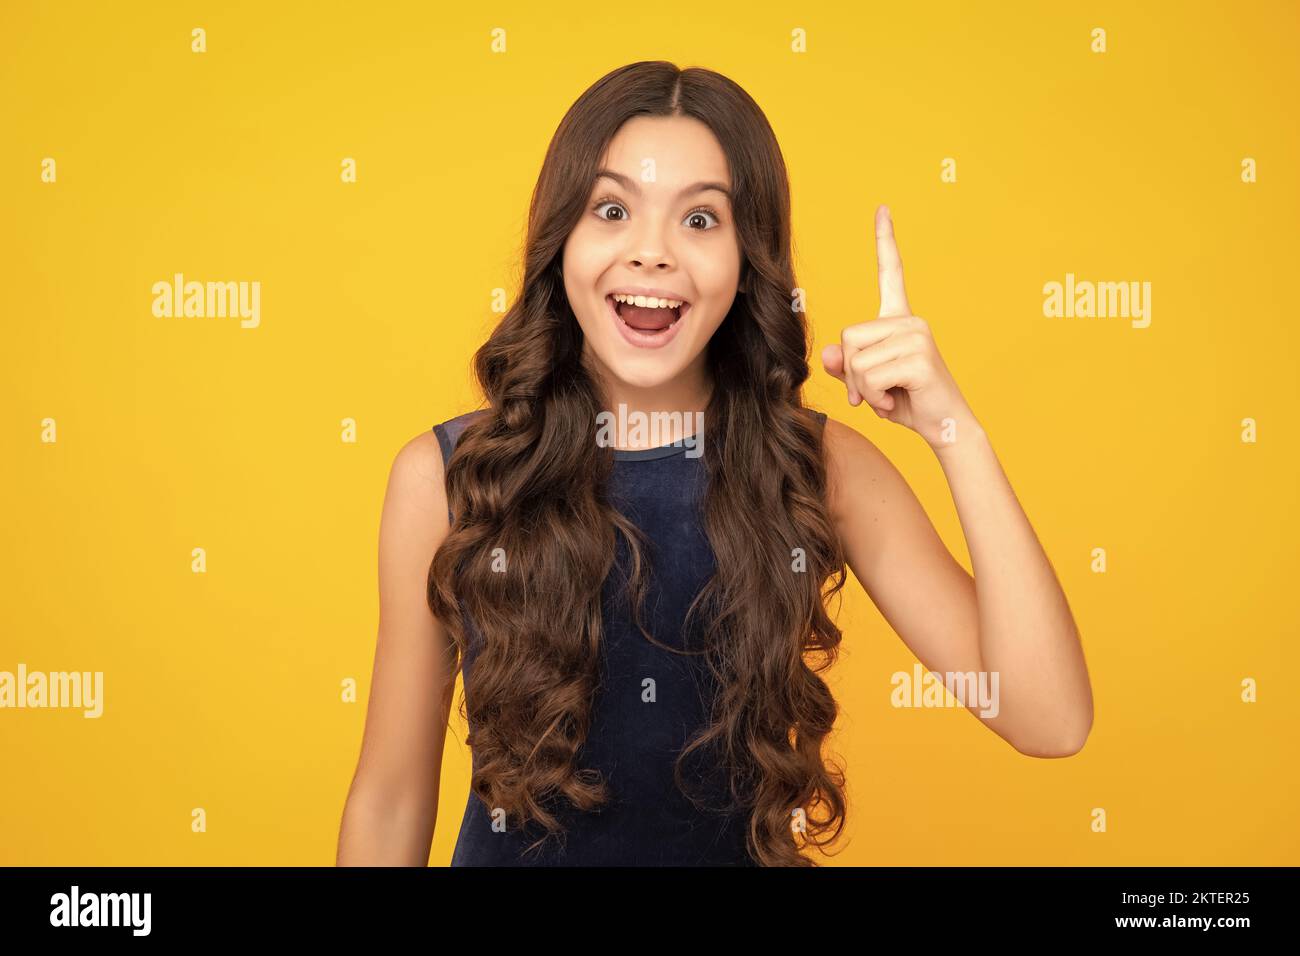 Excited face, cheerful emotions of teenager girl. Portrait of young teenager pointing up with finger, isolated on yellow background. Funny school girl Stock Photo